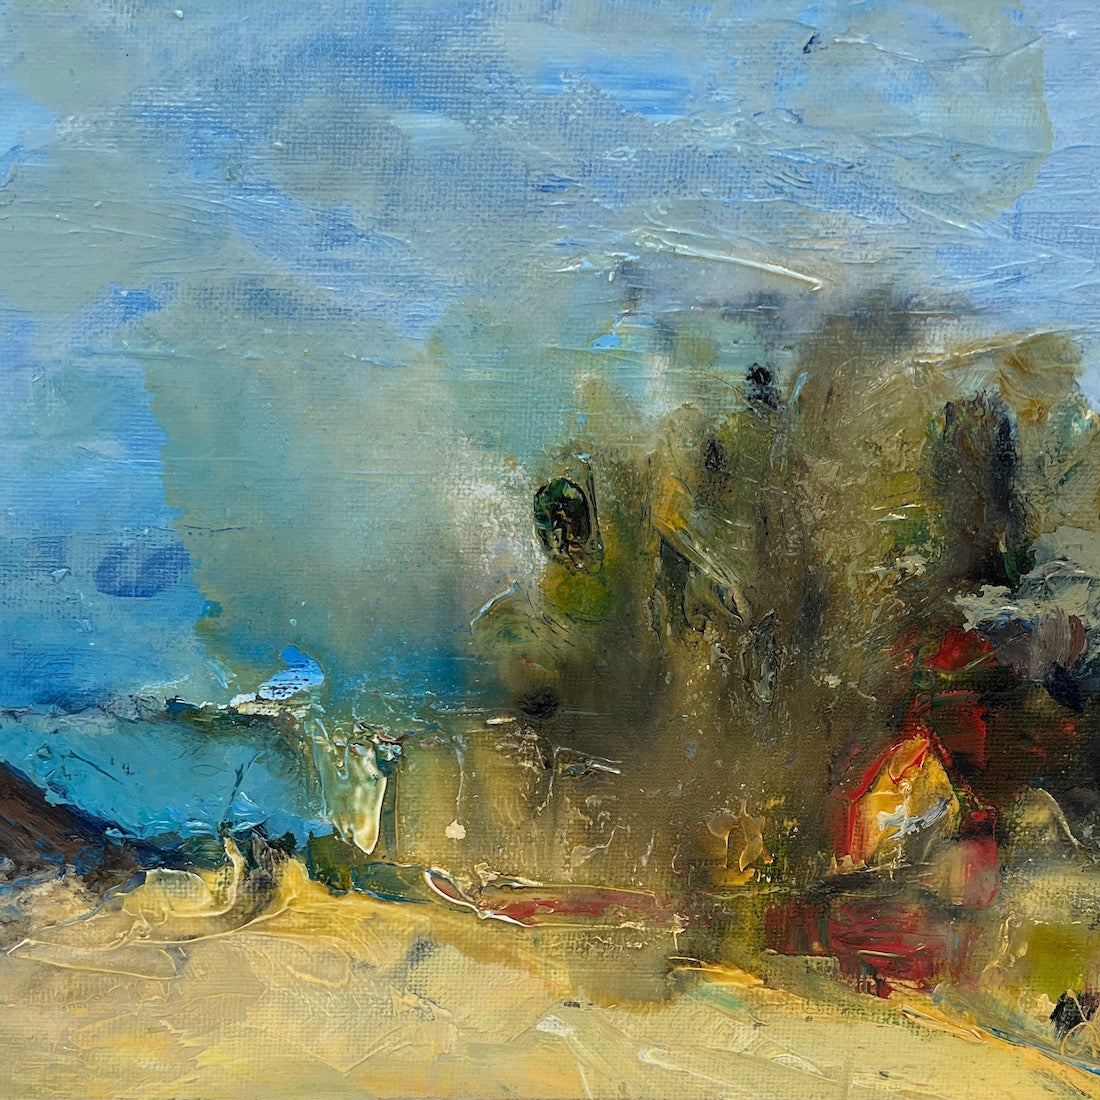 Abstract painting of Little Austinmer Beach, just north of Austinmer Beach near Wollongong NSW. Square view.